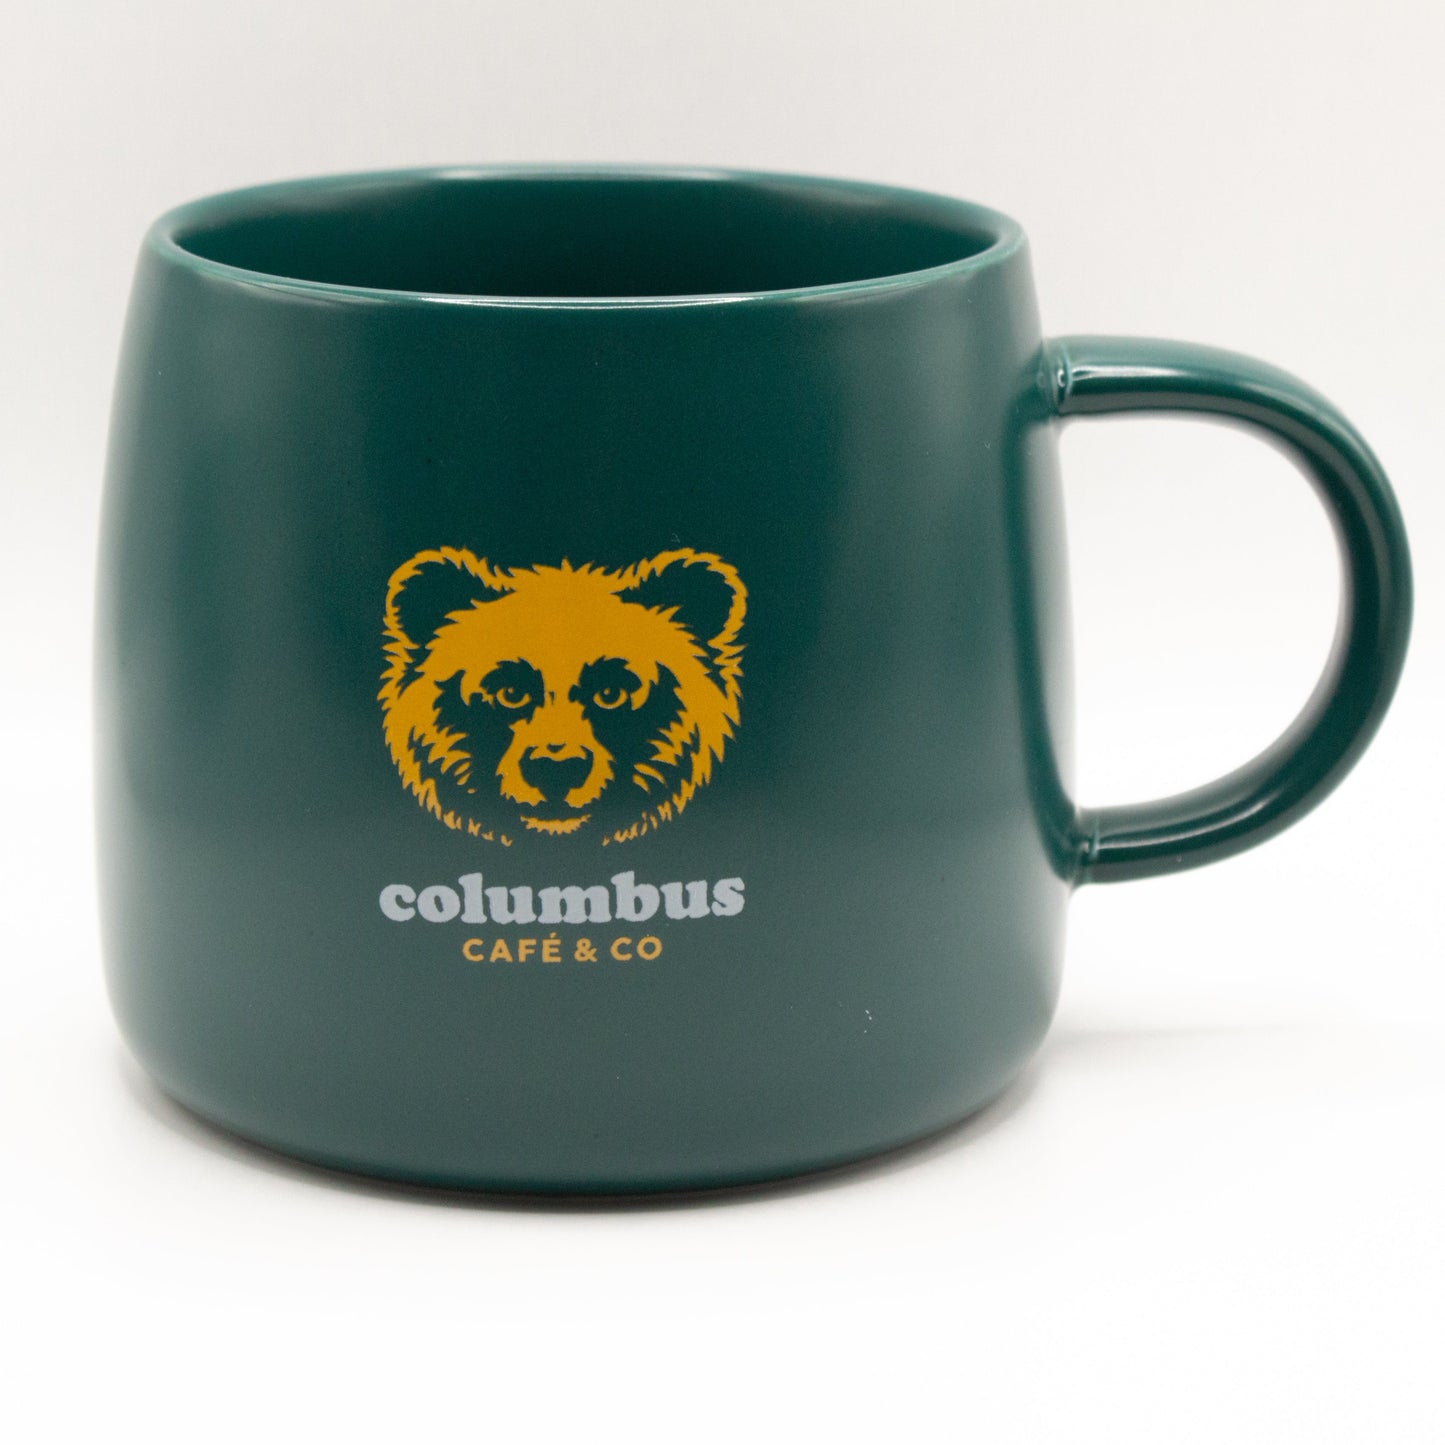 Opening package - Columbus Café & co